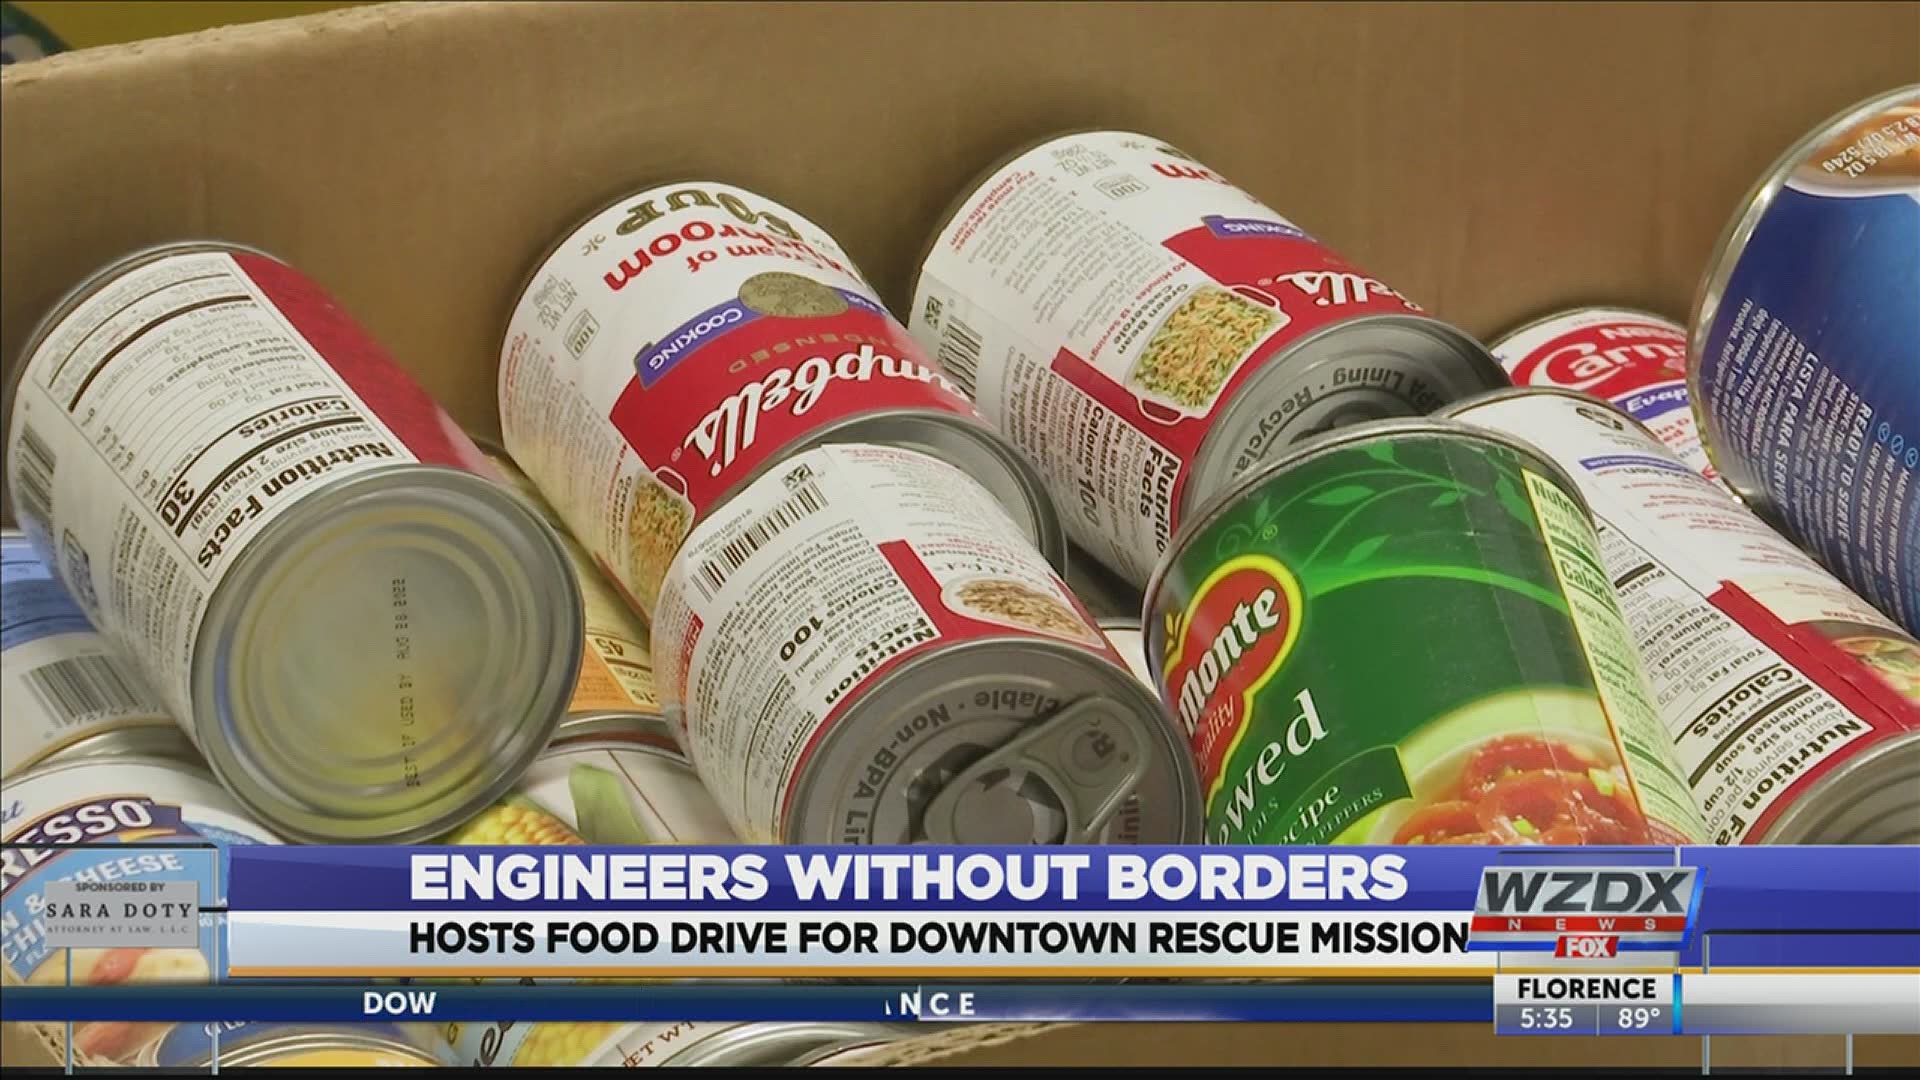 Engineers Without Borders is holding a food drive Saturday, August 8th and Sunday, August 9 from 12:00 pm until 2:00 pm.